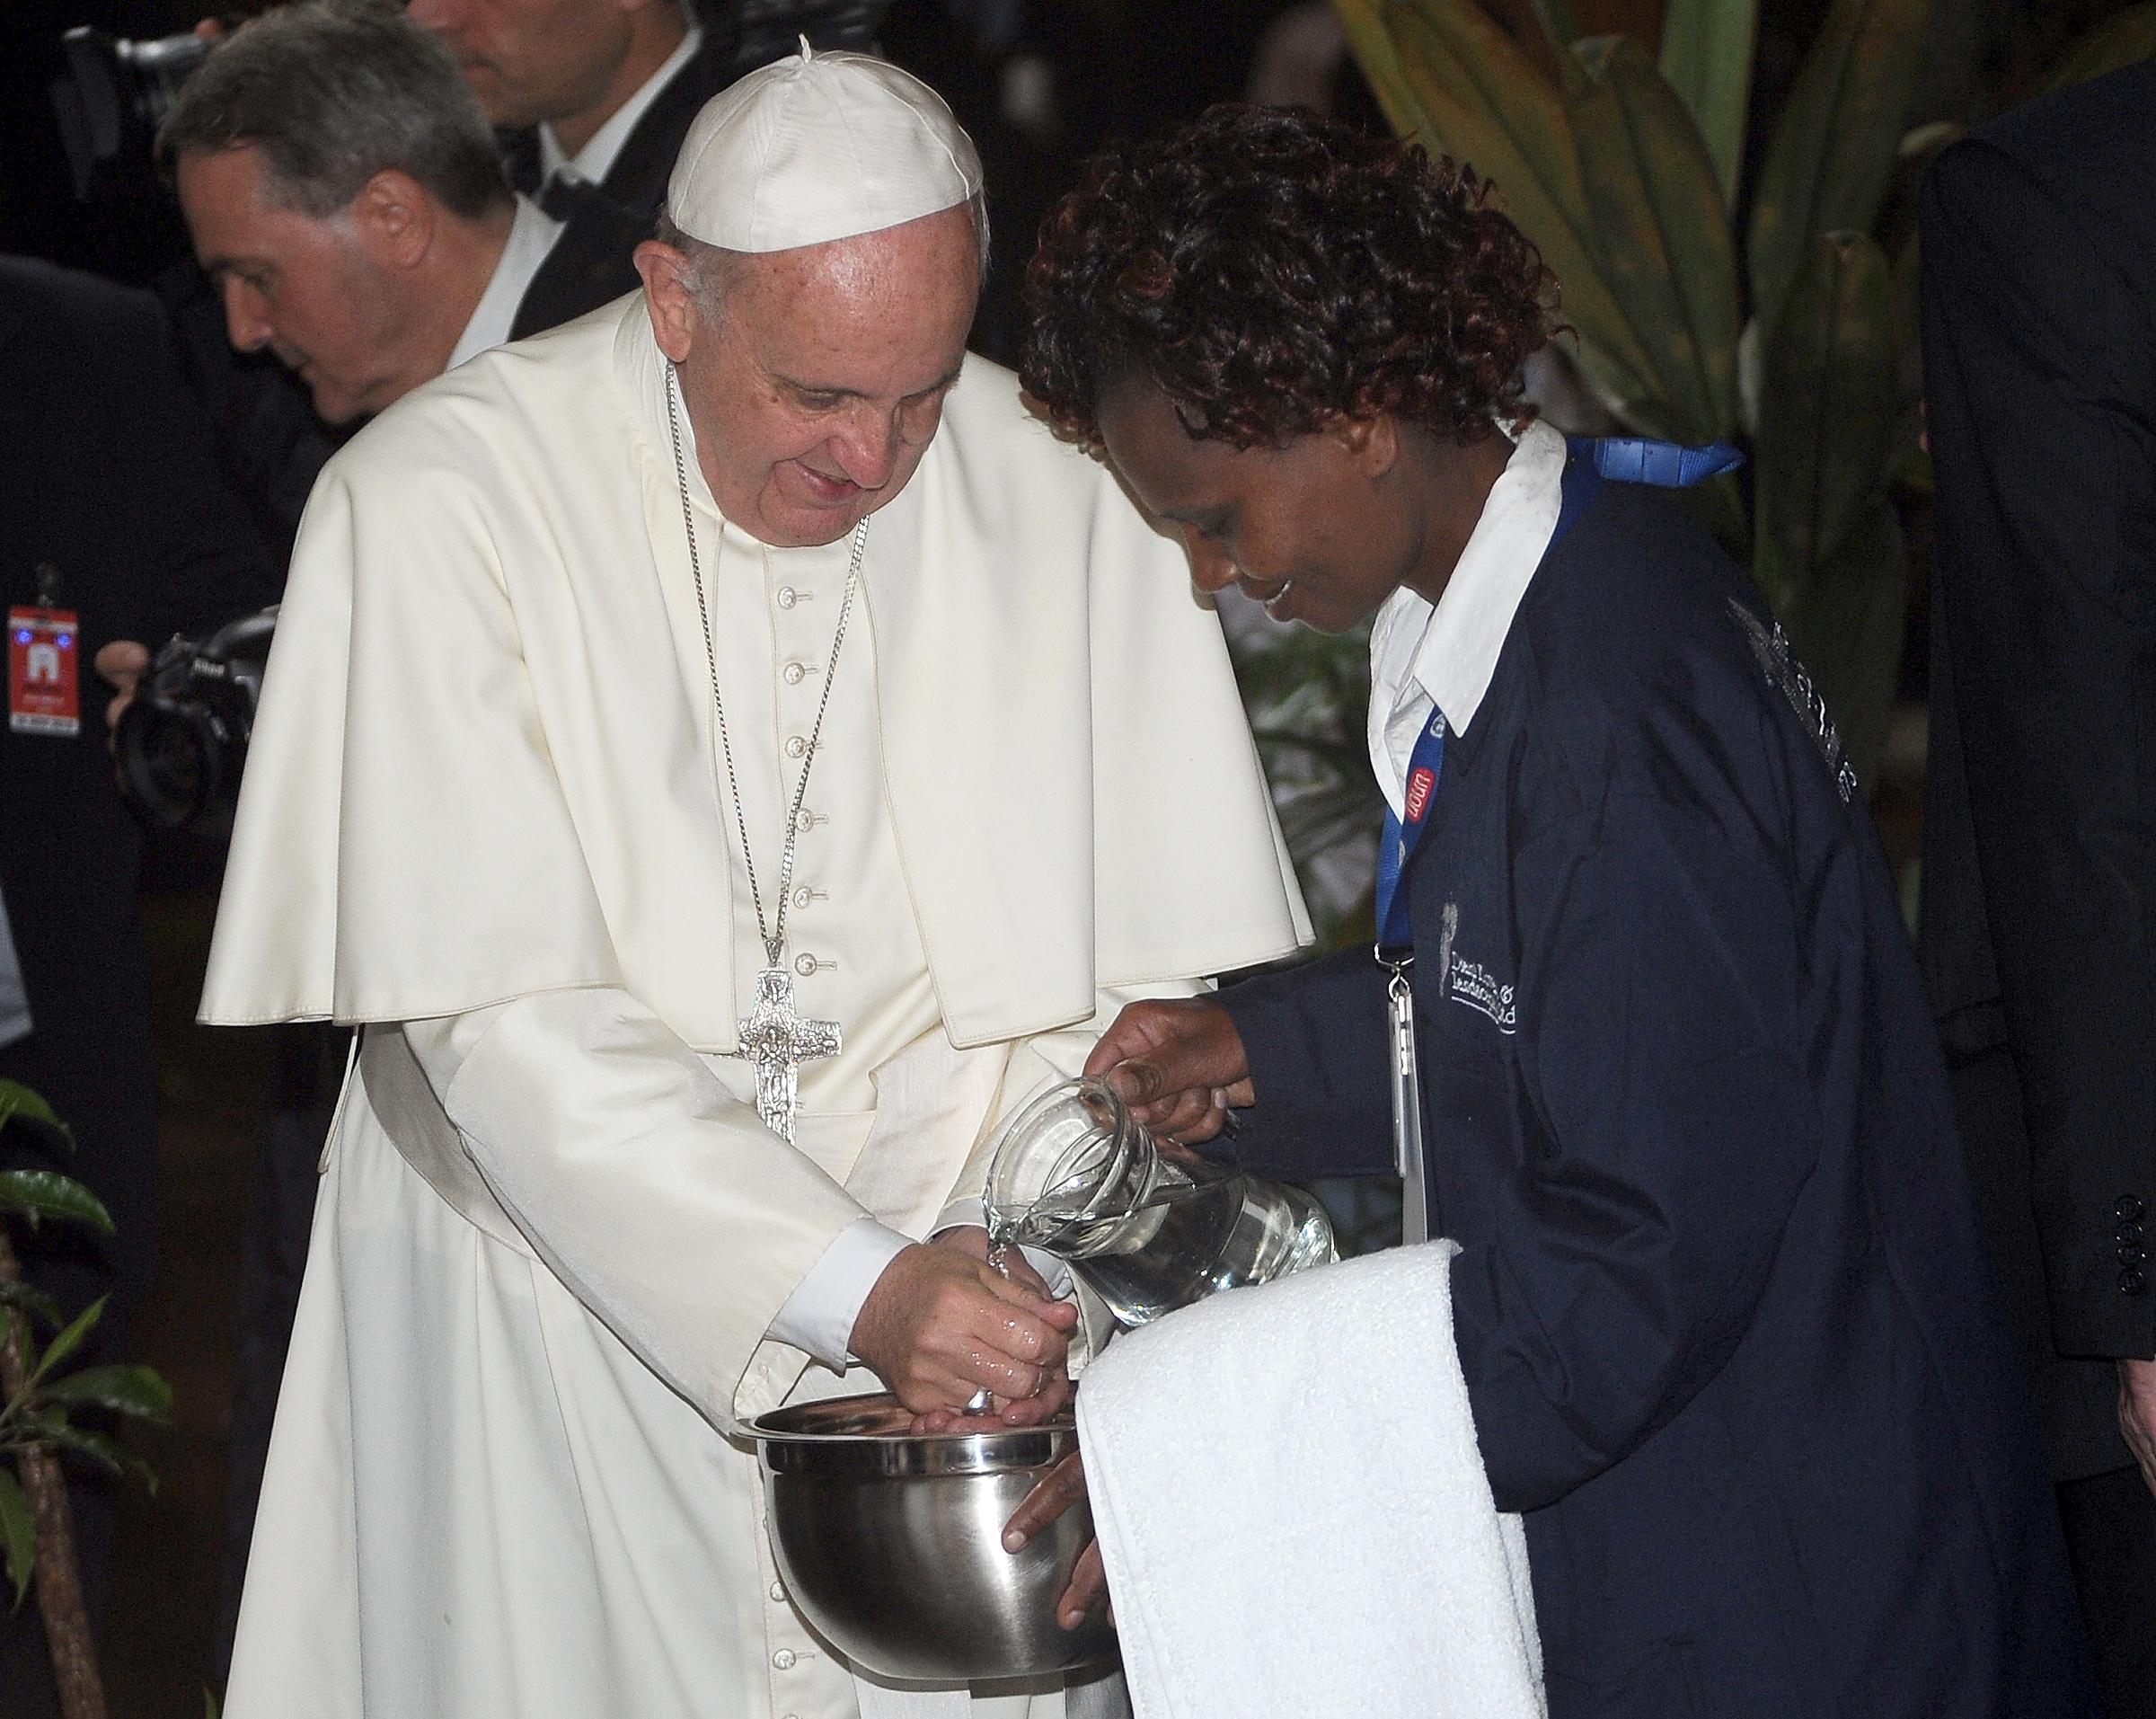 Pope Francis washes his hands after planting a tree during a visit to the United Nations Office in Nairobi